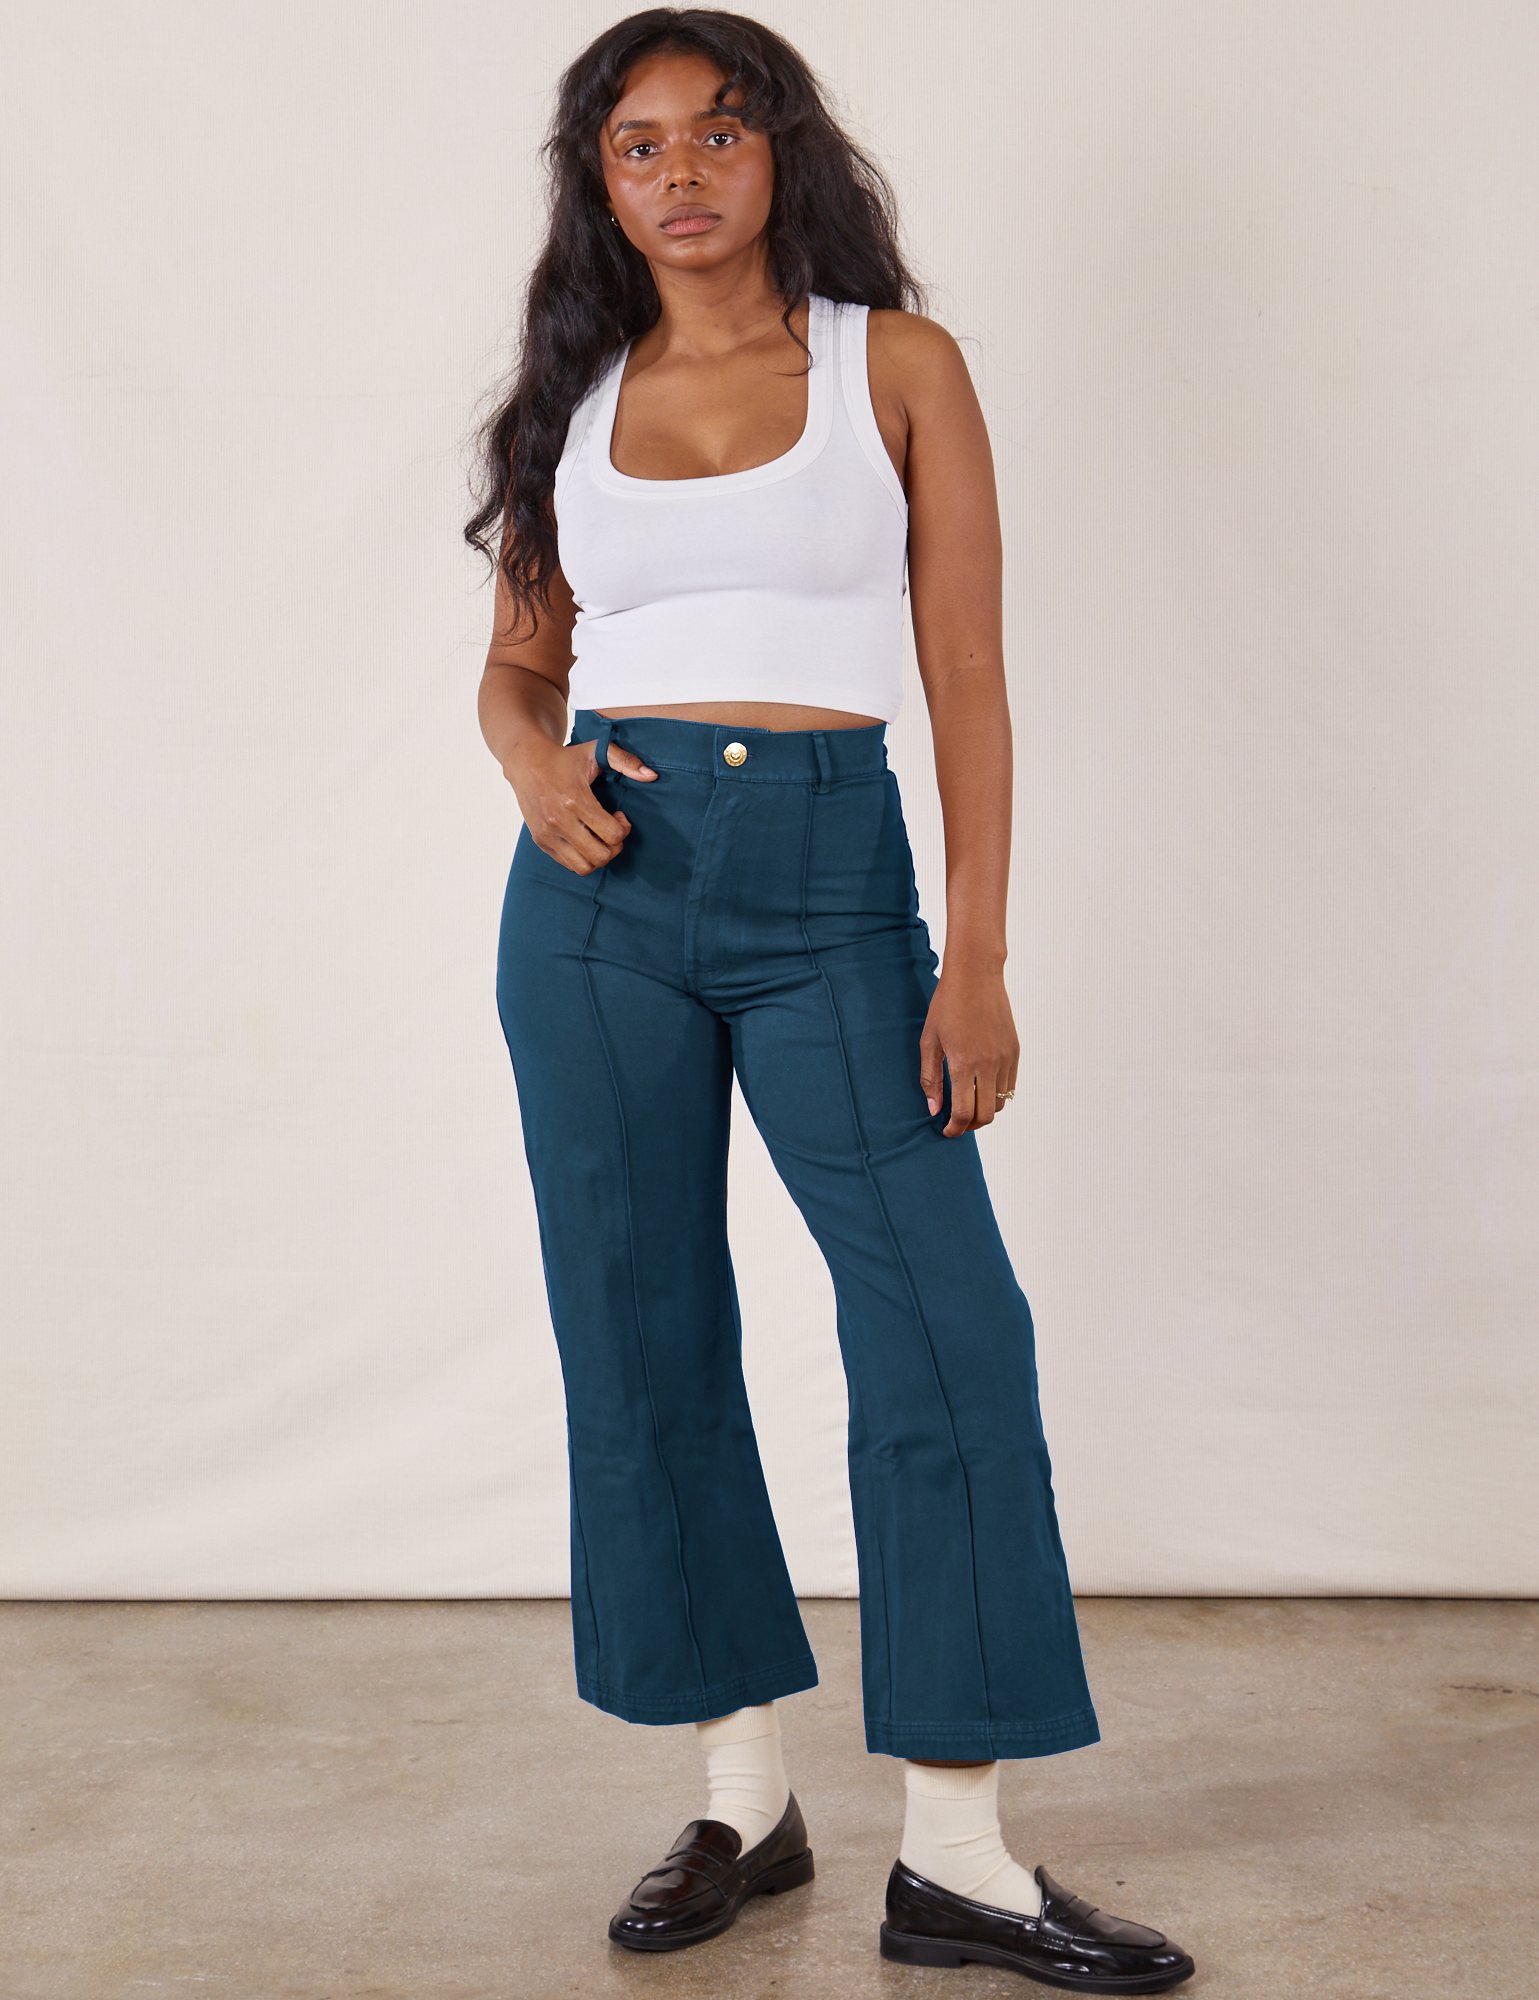 Kandia is 5&#39;4&quot; and wearing XS Petite Western Pants in Lagoon paired with vintage tee off-white Cropped Tank